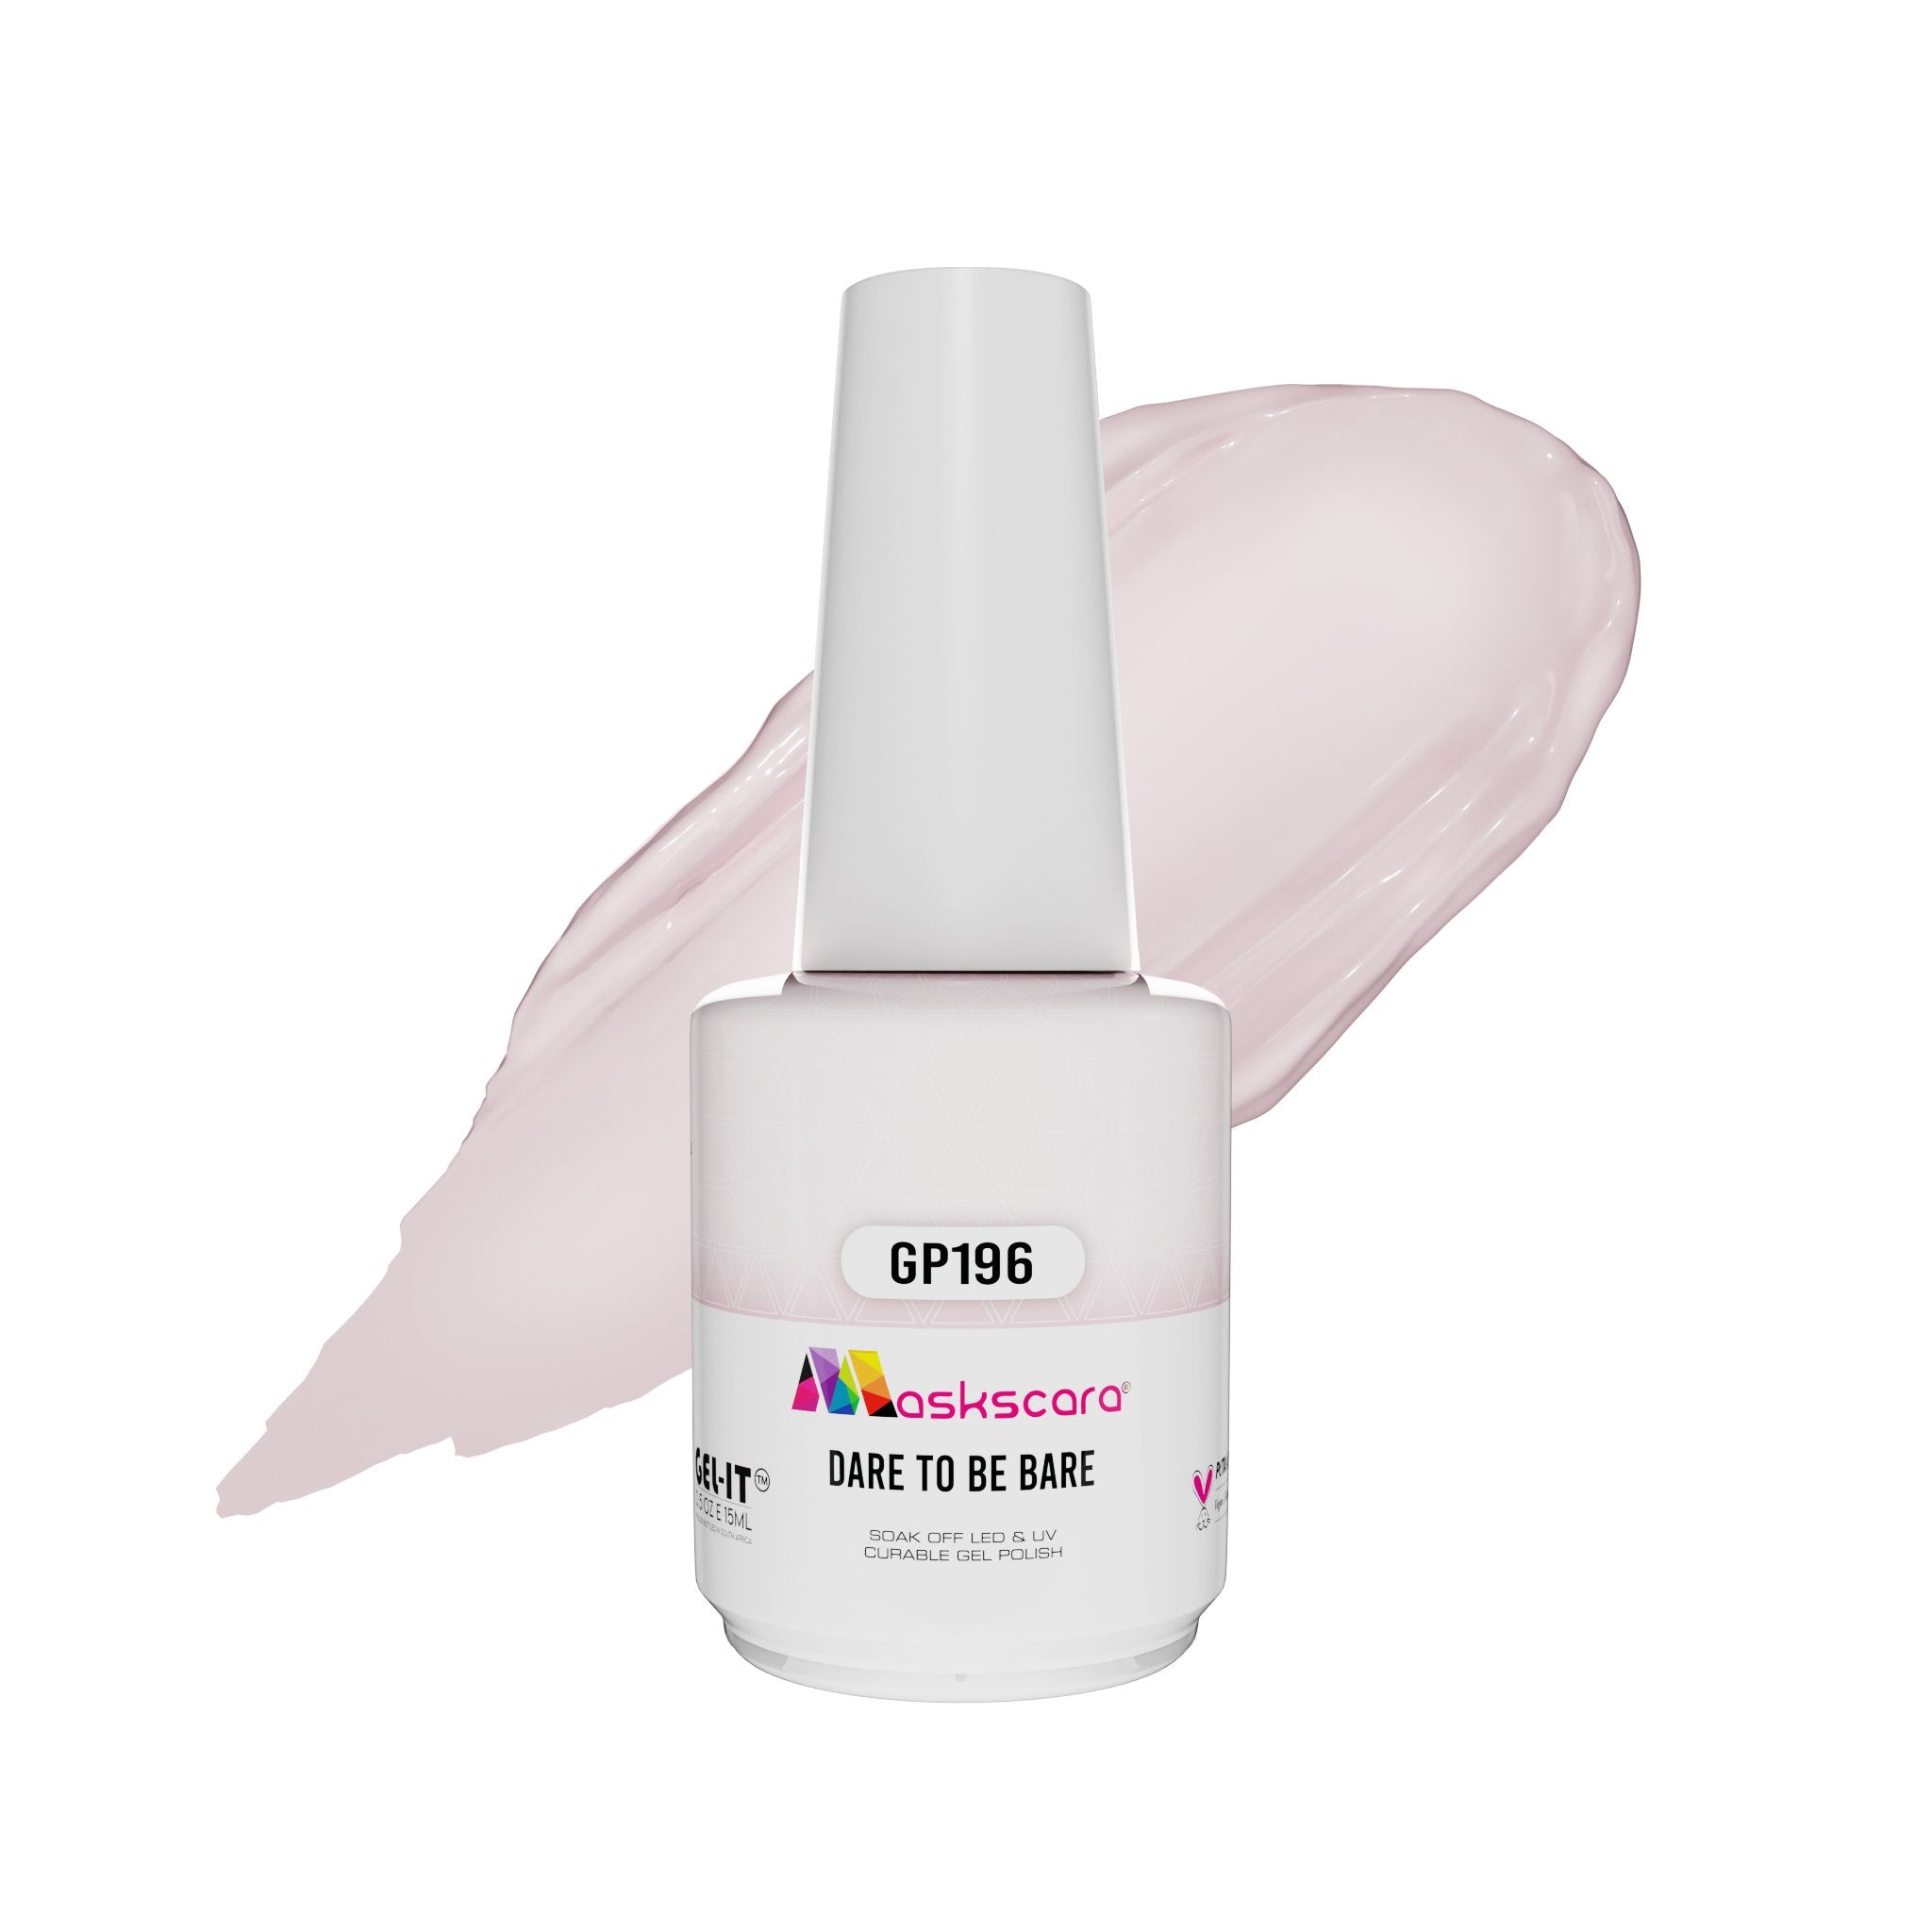 <img scr = “ GP196 Dare To Be Bare.jpeg” alt = “Milky Nude gel polish colour by the brand Maskscara”>